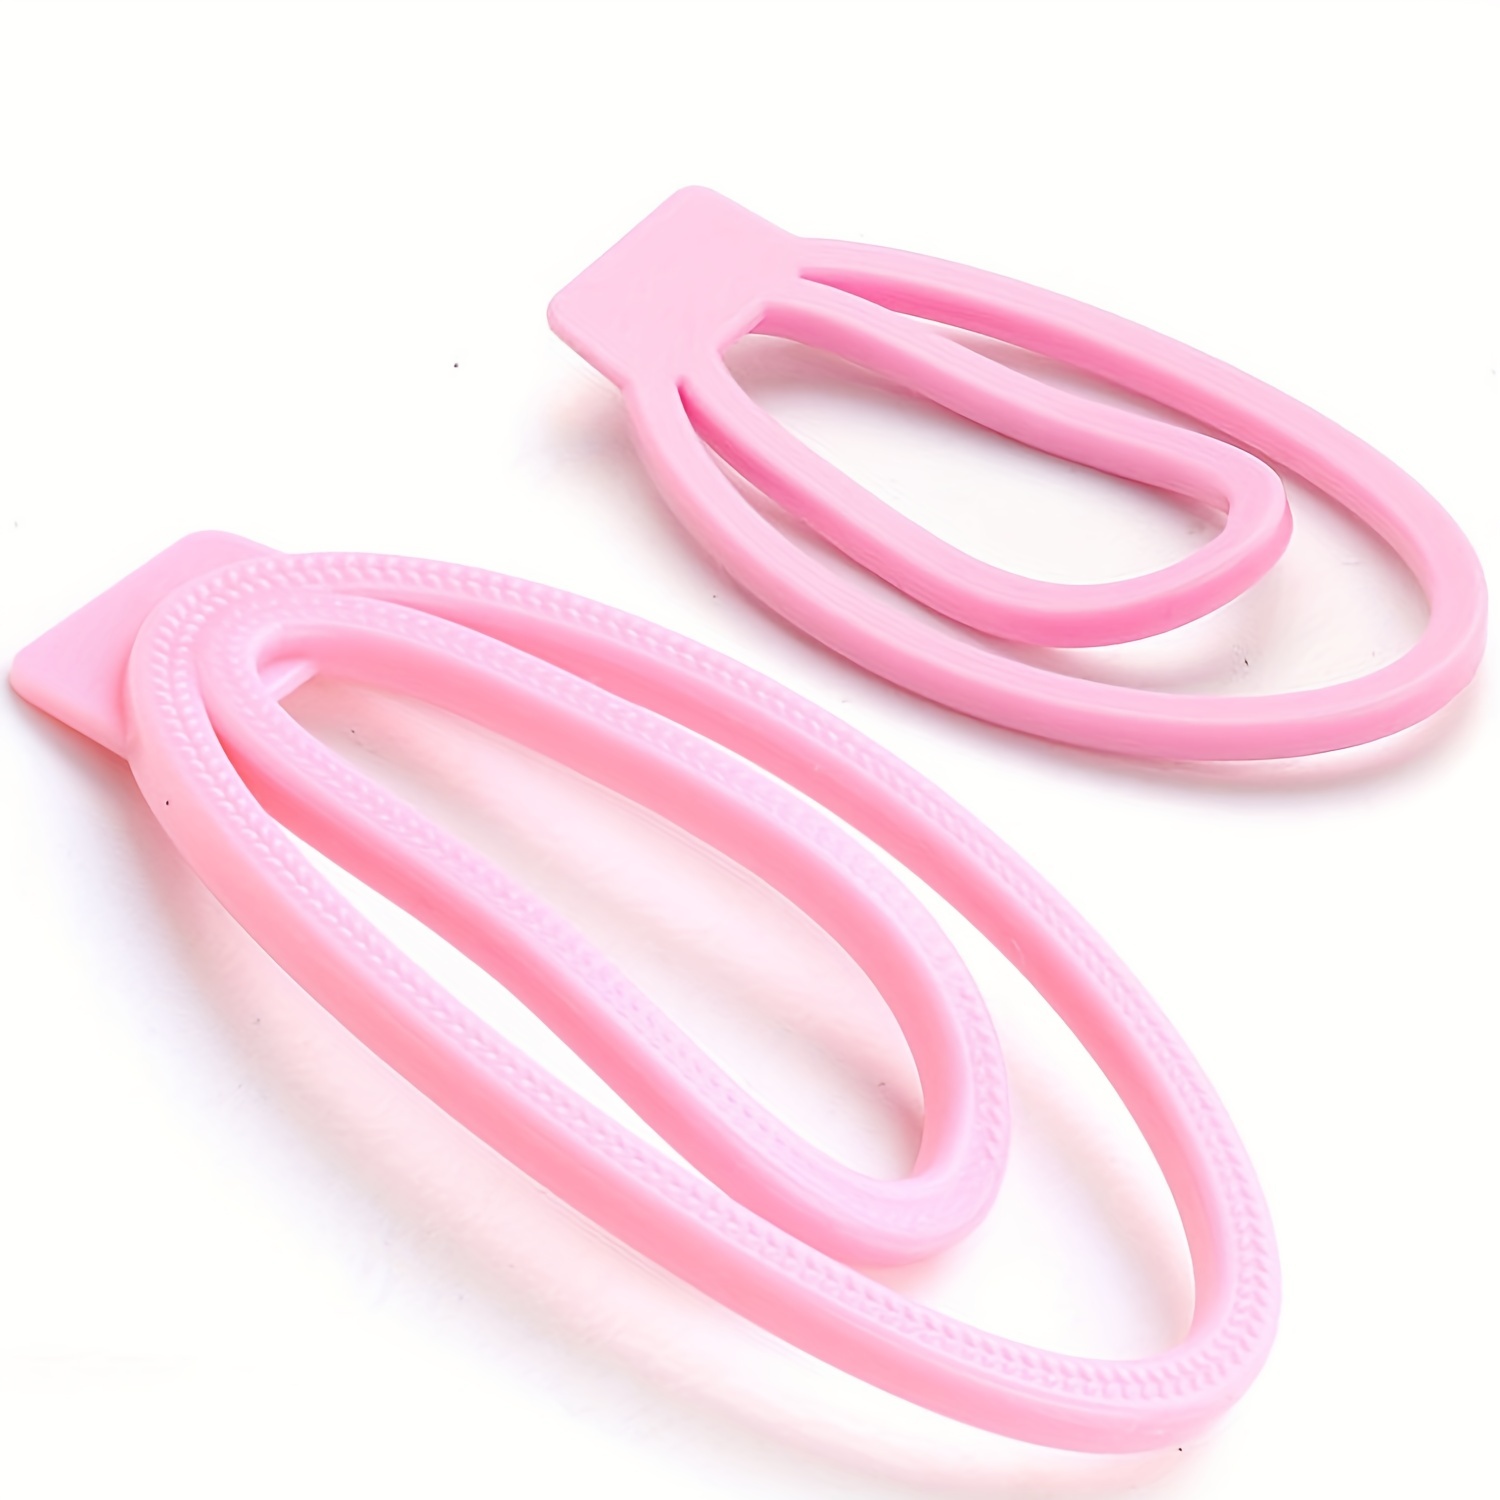 Fufu Clip Male Panty Chastity Device Male Mimic Female Pussy